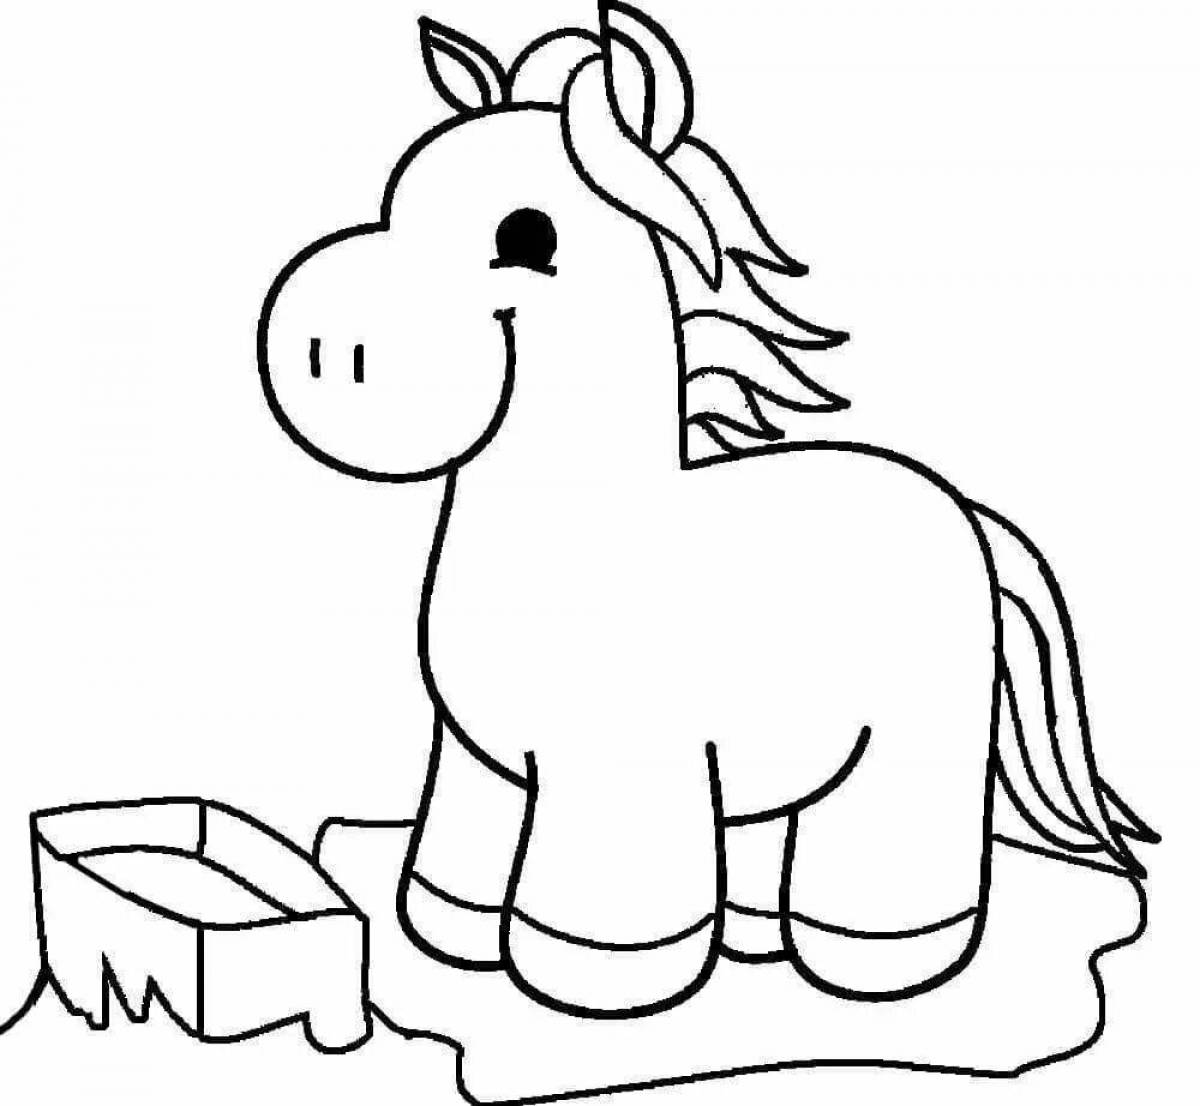 Exciting horse coloring book for 3-4 year olds